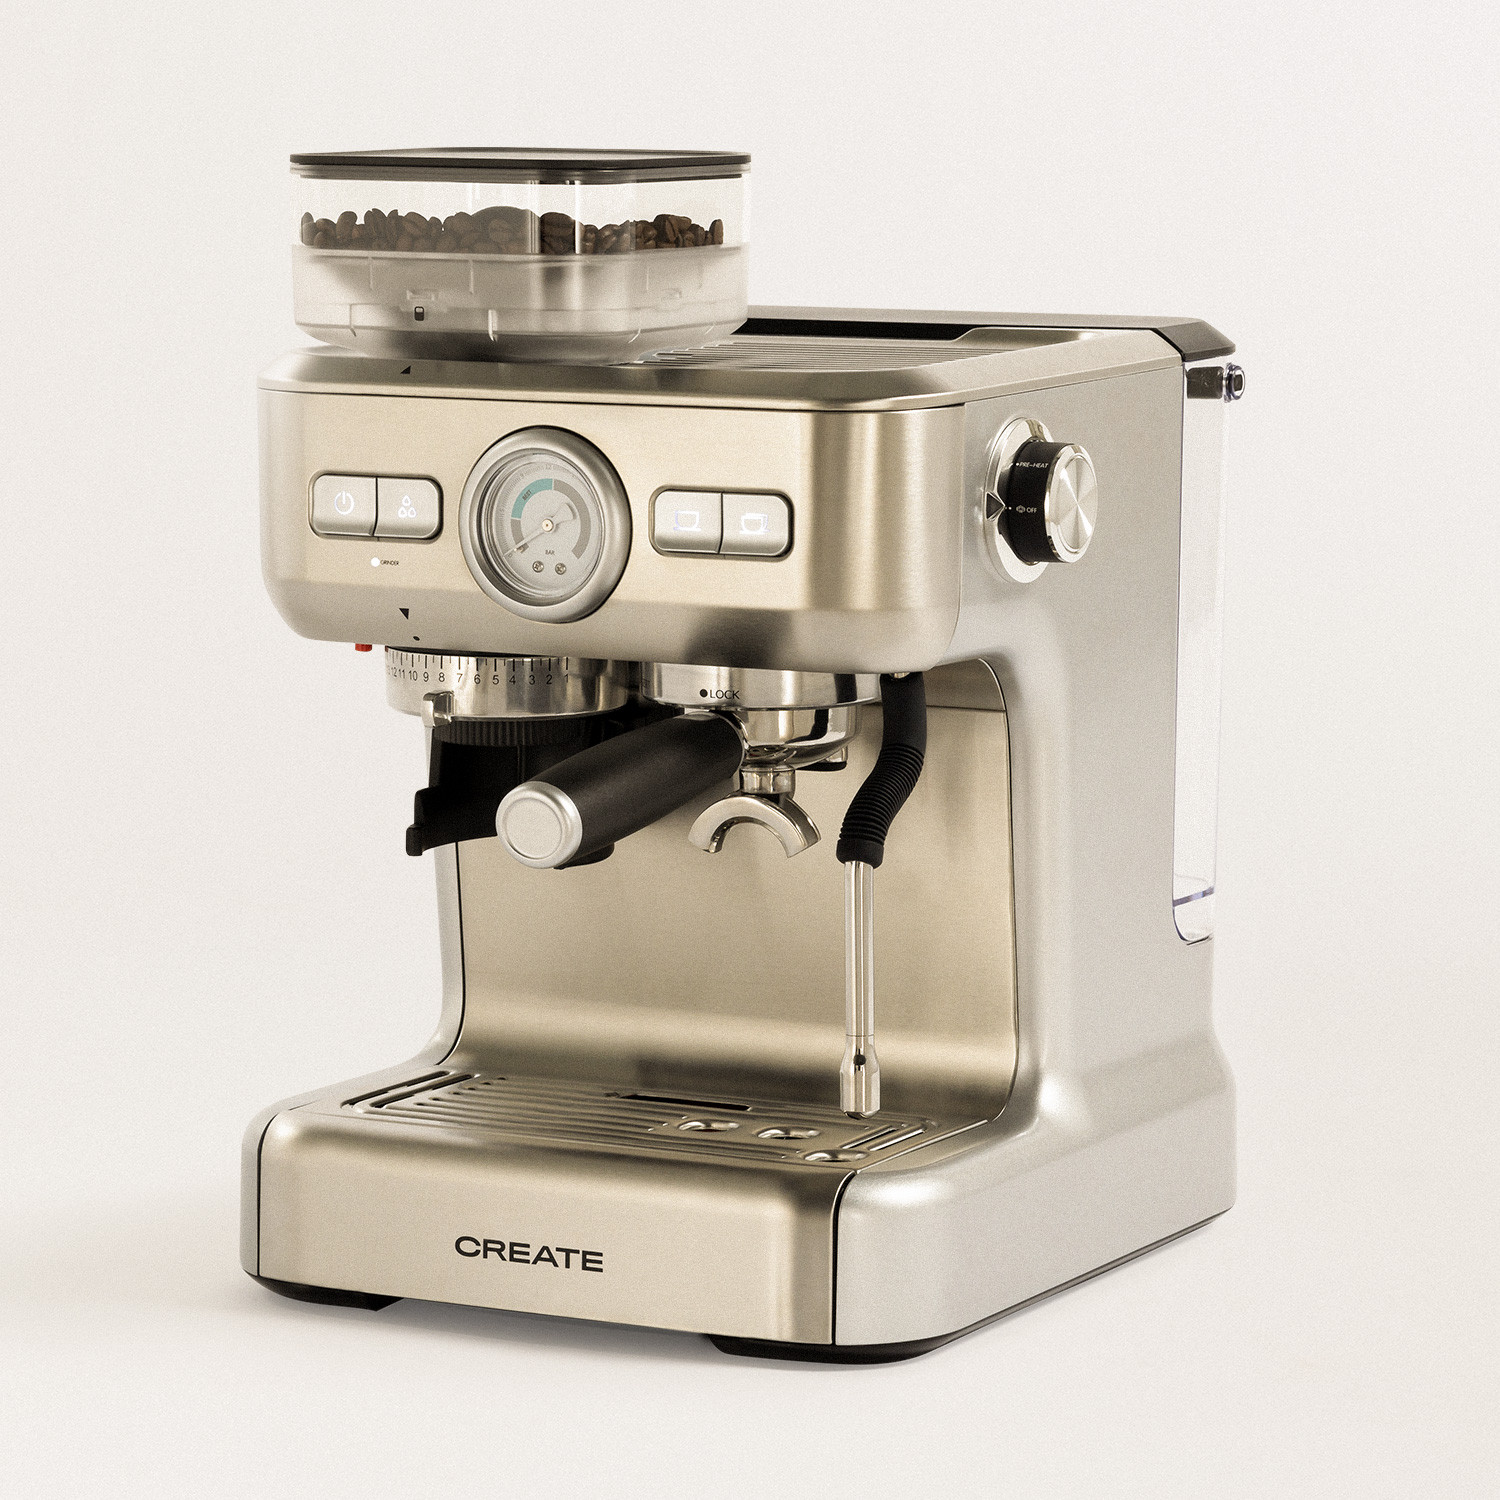 CREATE-THERA STYLANCE PRO Cafetera Expresso Automática »